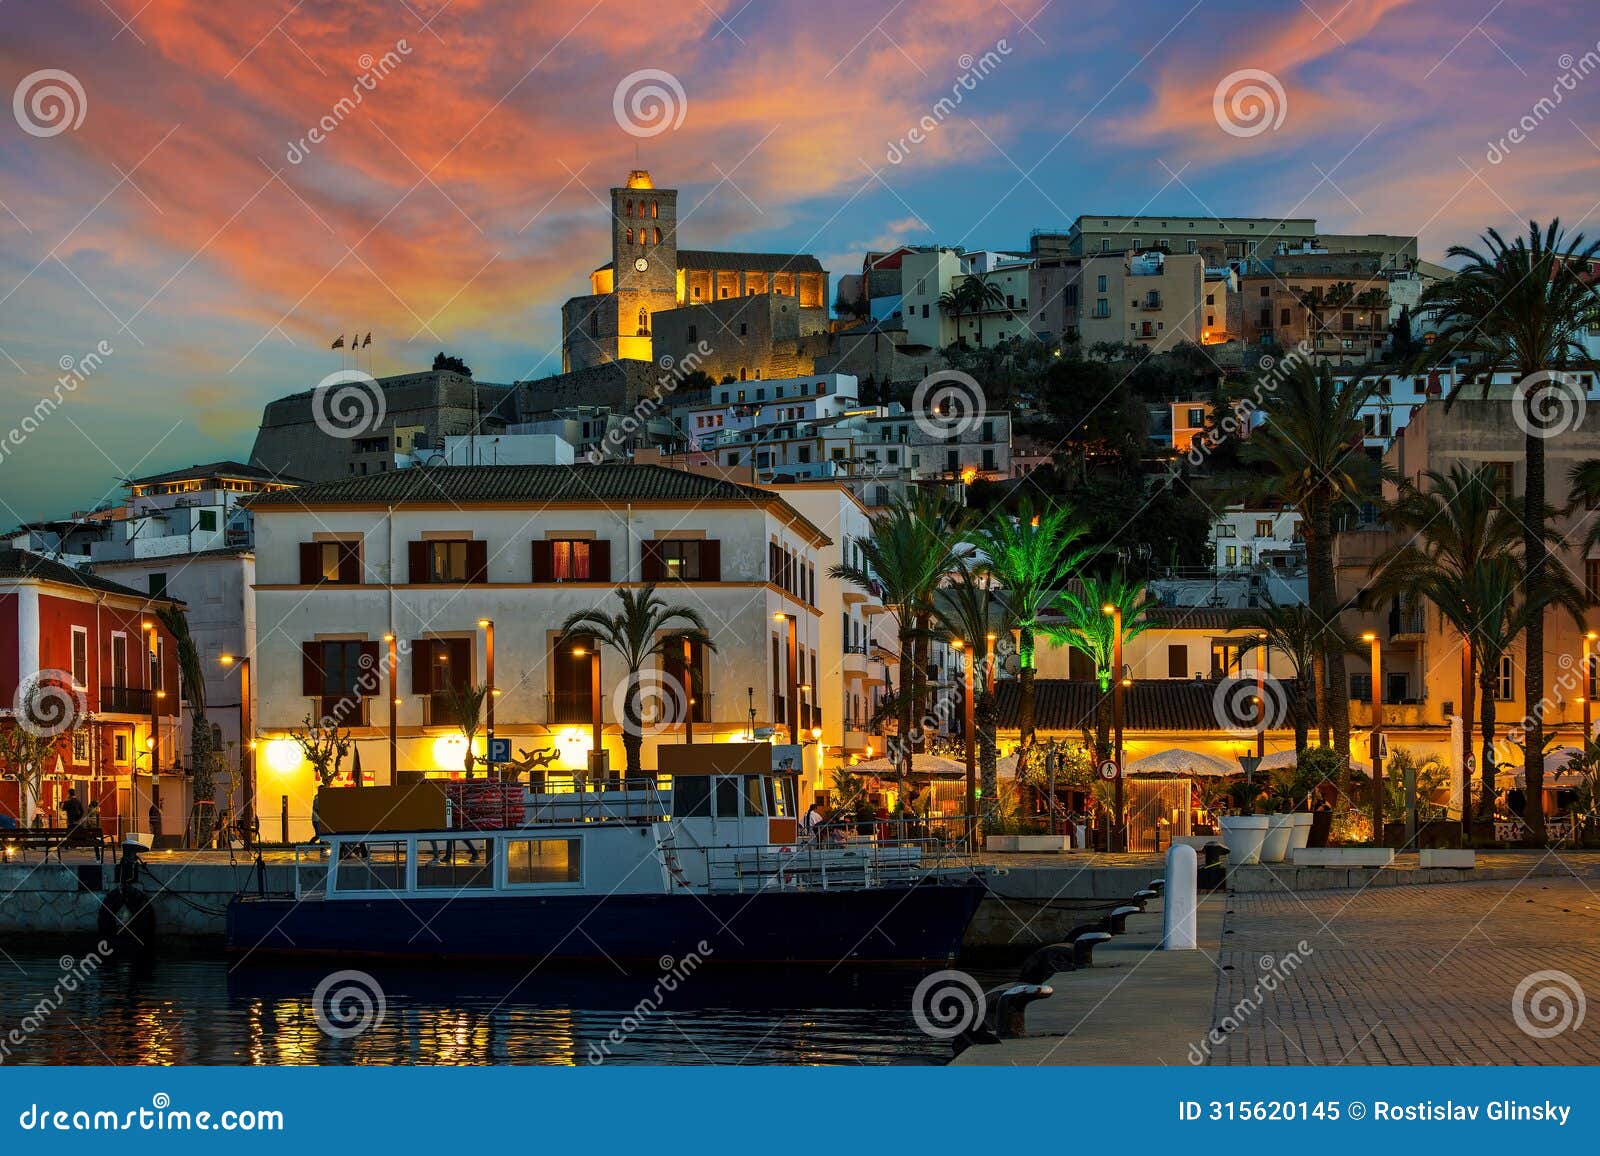 evening view of the old town of eivissa, ibiza, spain